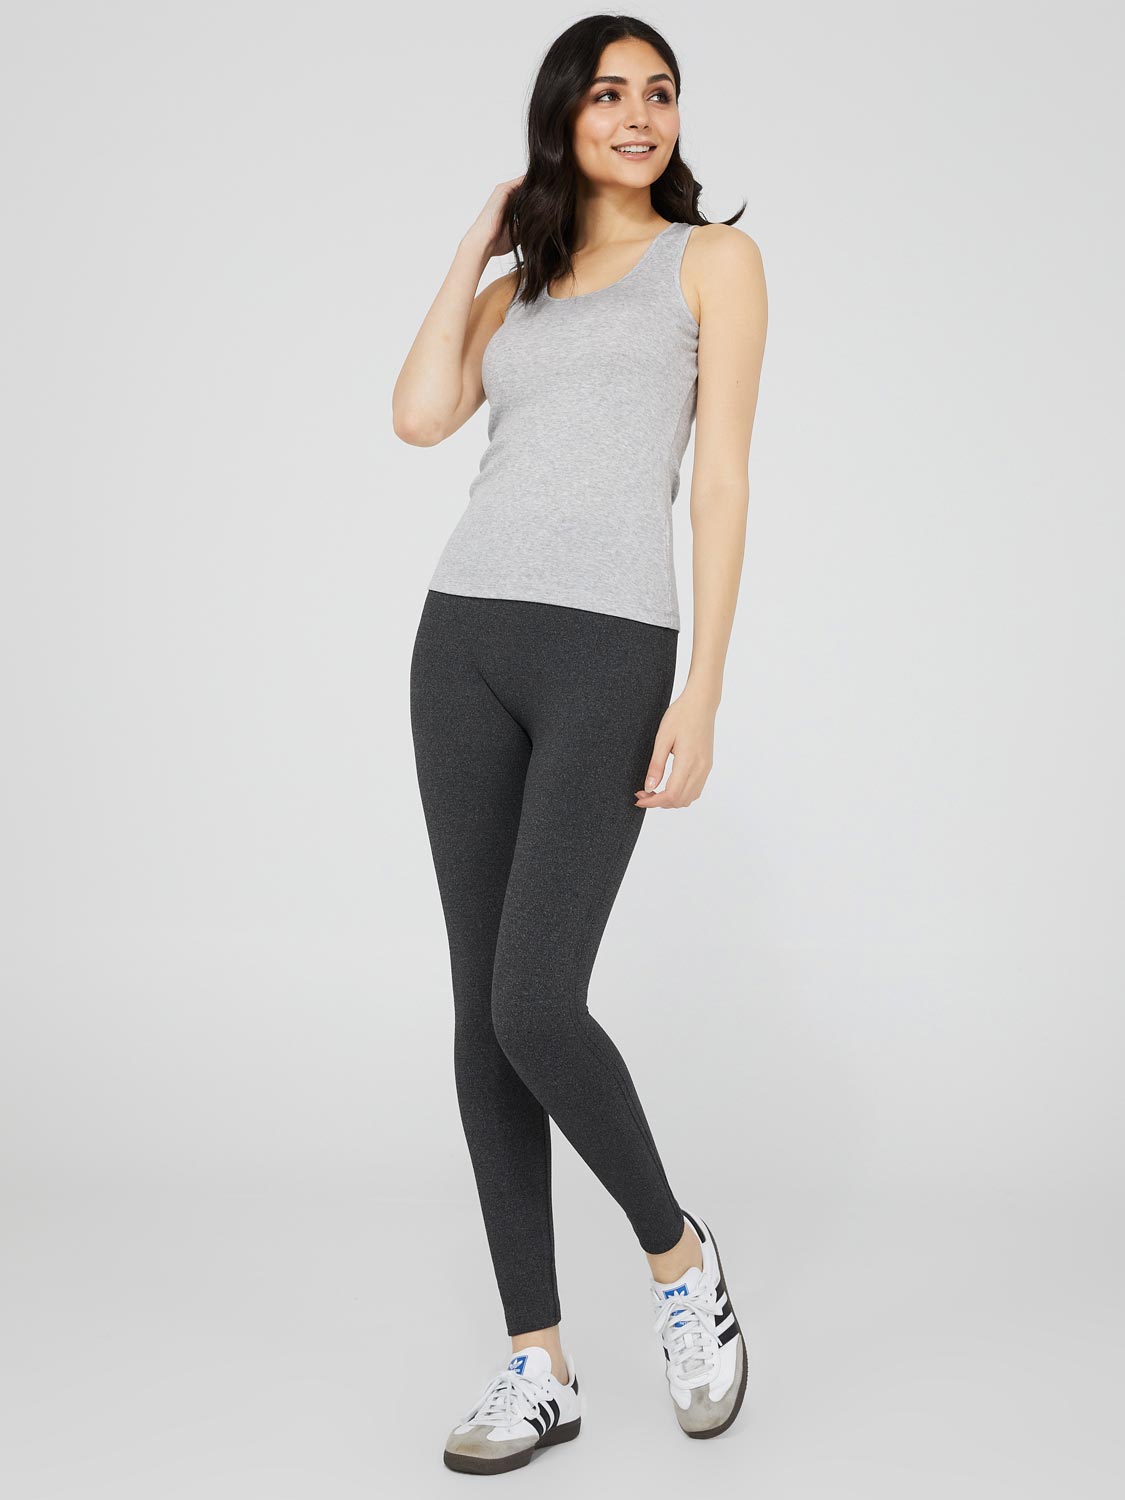 LIKE this post & comment SHOP for this fleece lined leggings